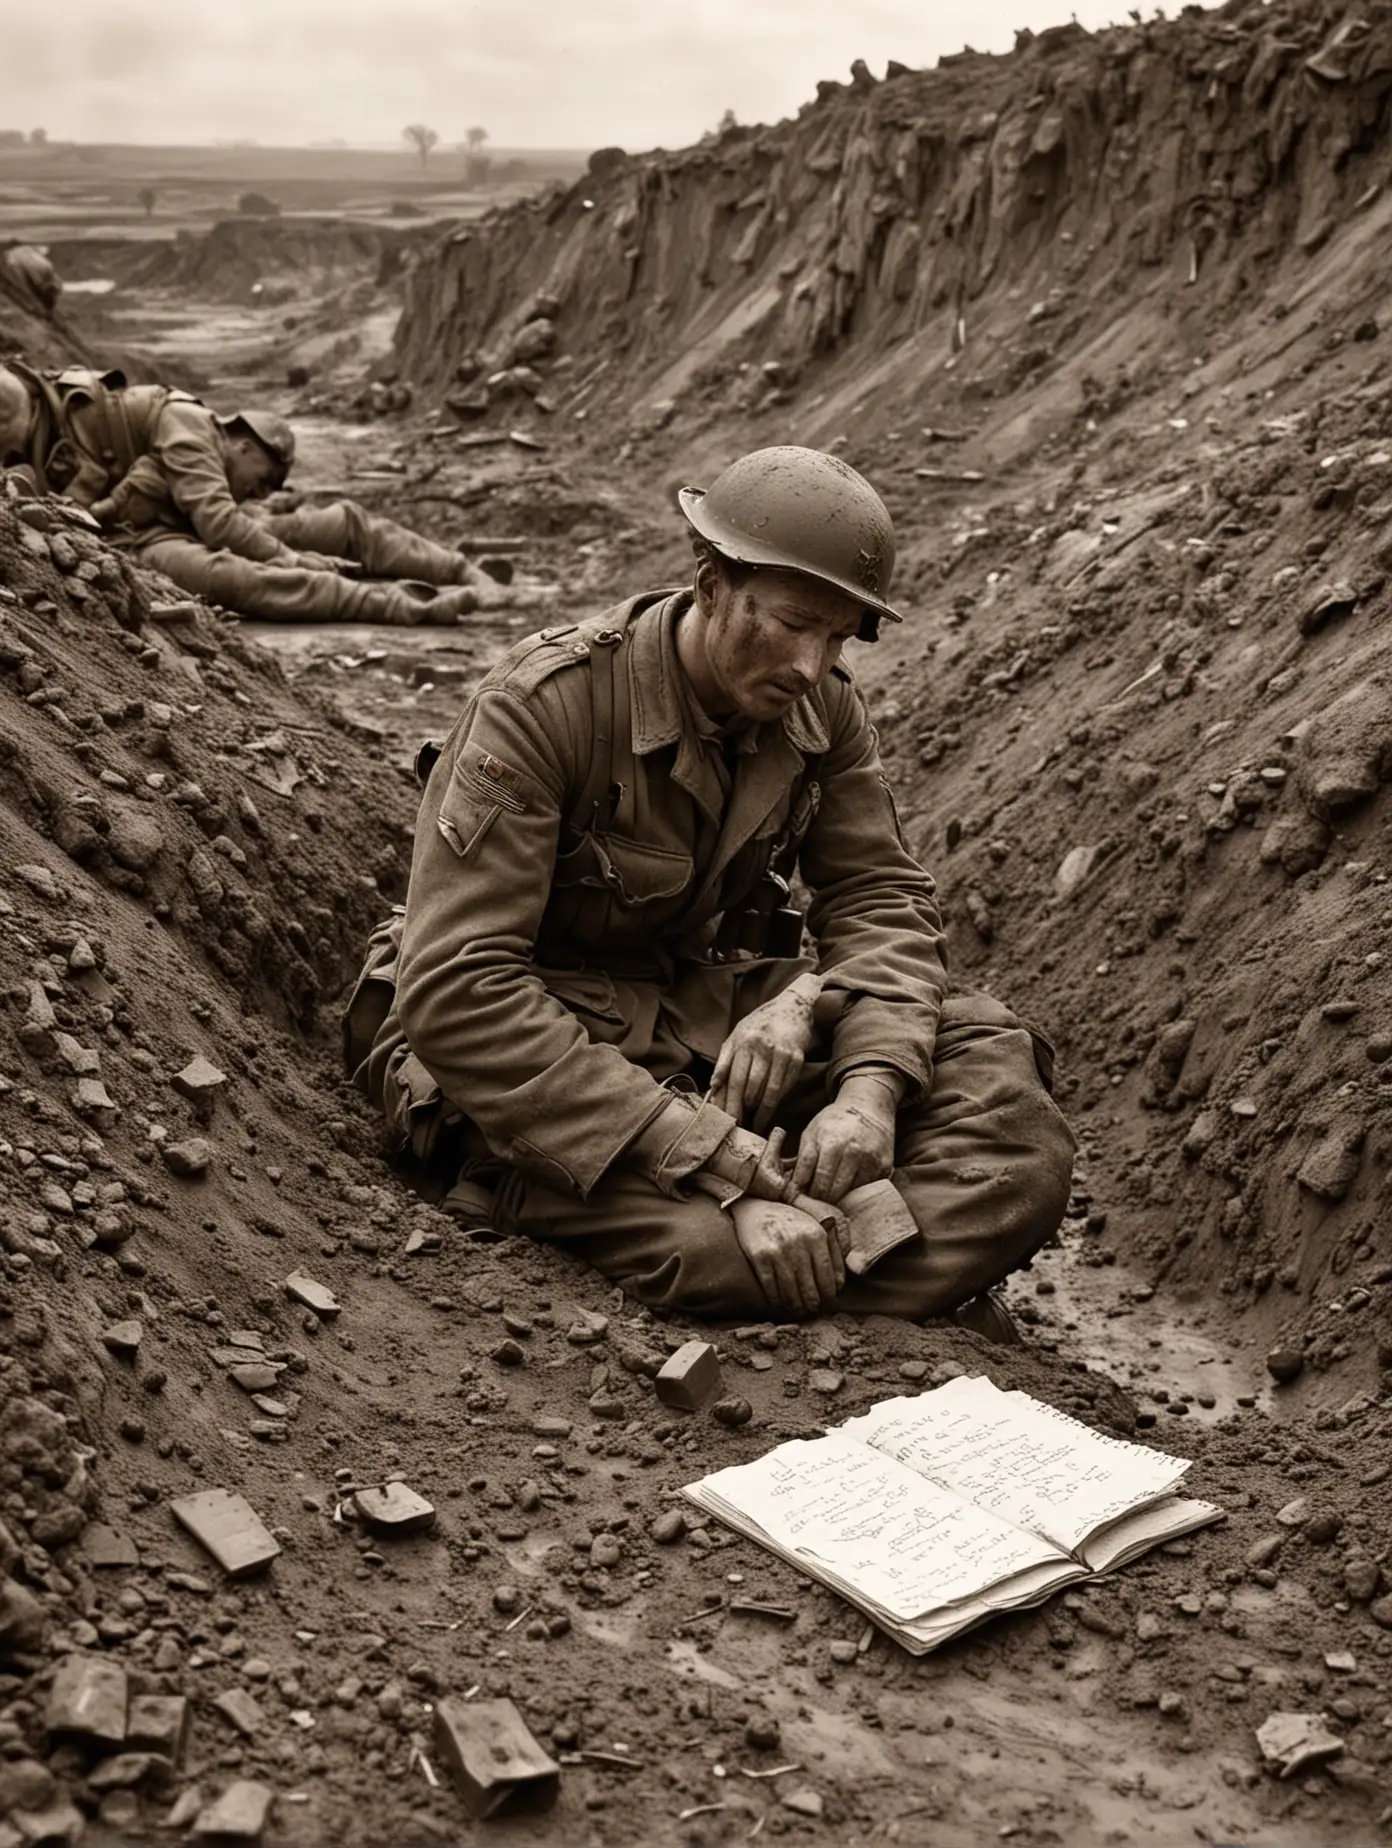 Wilfred Owen soldier and Dying British soldier lying in a dirty, muddy, desolate blown-out bomb crater. Owen is writing in his notepad with his pen as he lies next to the man. The war is raging in the background outside the large bomb crater. Own is facing towards us almost lying his back against the bomb crater wall.Next to a dying british soldier at war. the war is going on in the background.Owen and the soldier are alone in the LARGE bomb crater and they are isolated. The picture is a bit of them in the crater and then the desolate land in the distance of the war that is going on and the fields. Owen is lying next to the man while writing in the notepad. The crater is muddy and dirty. The man lays still.Owen is lying next to a fallen british soldier while writing in his notepad.